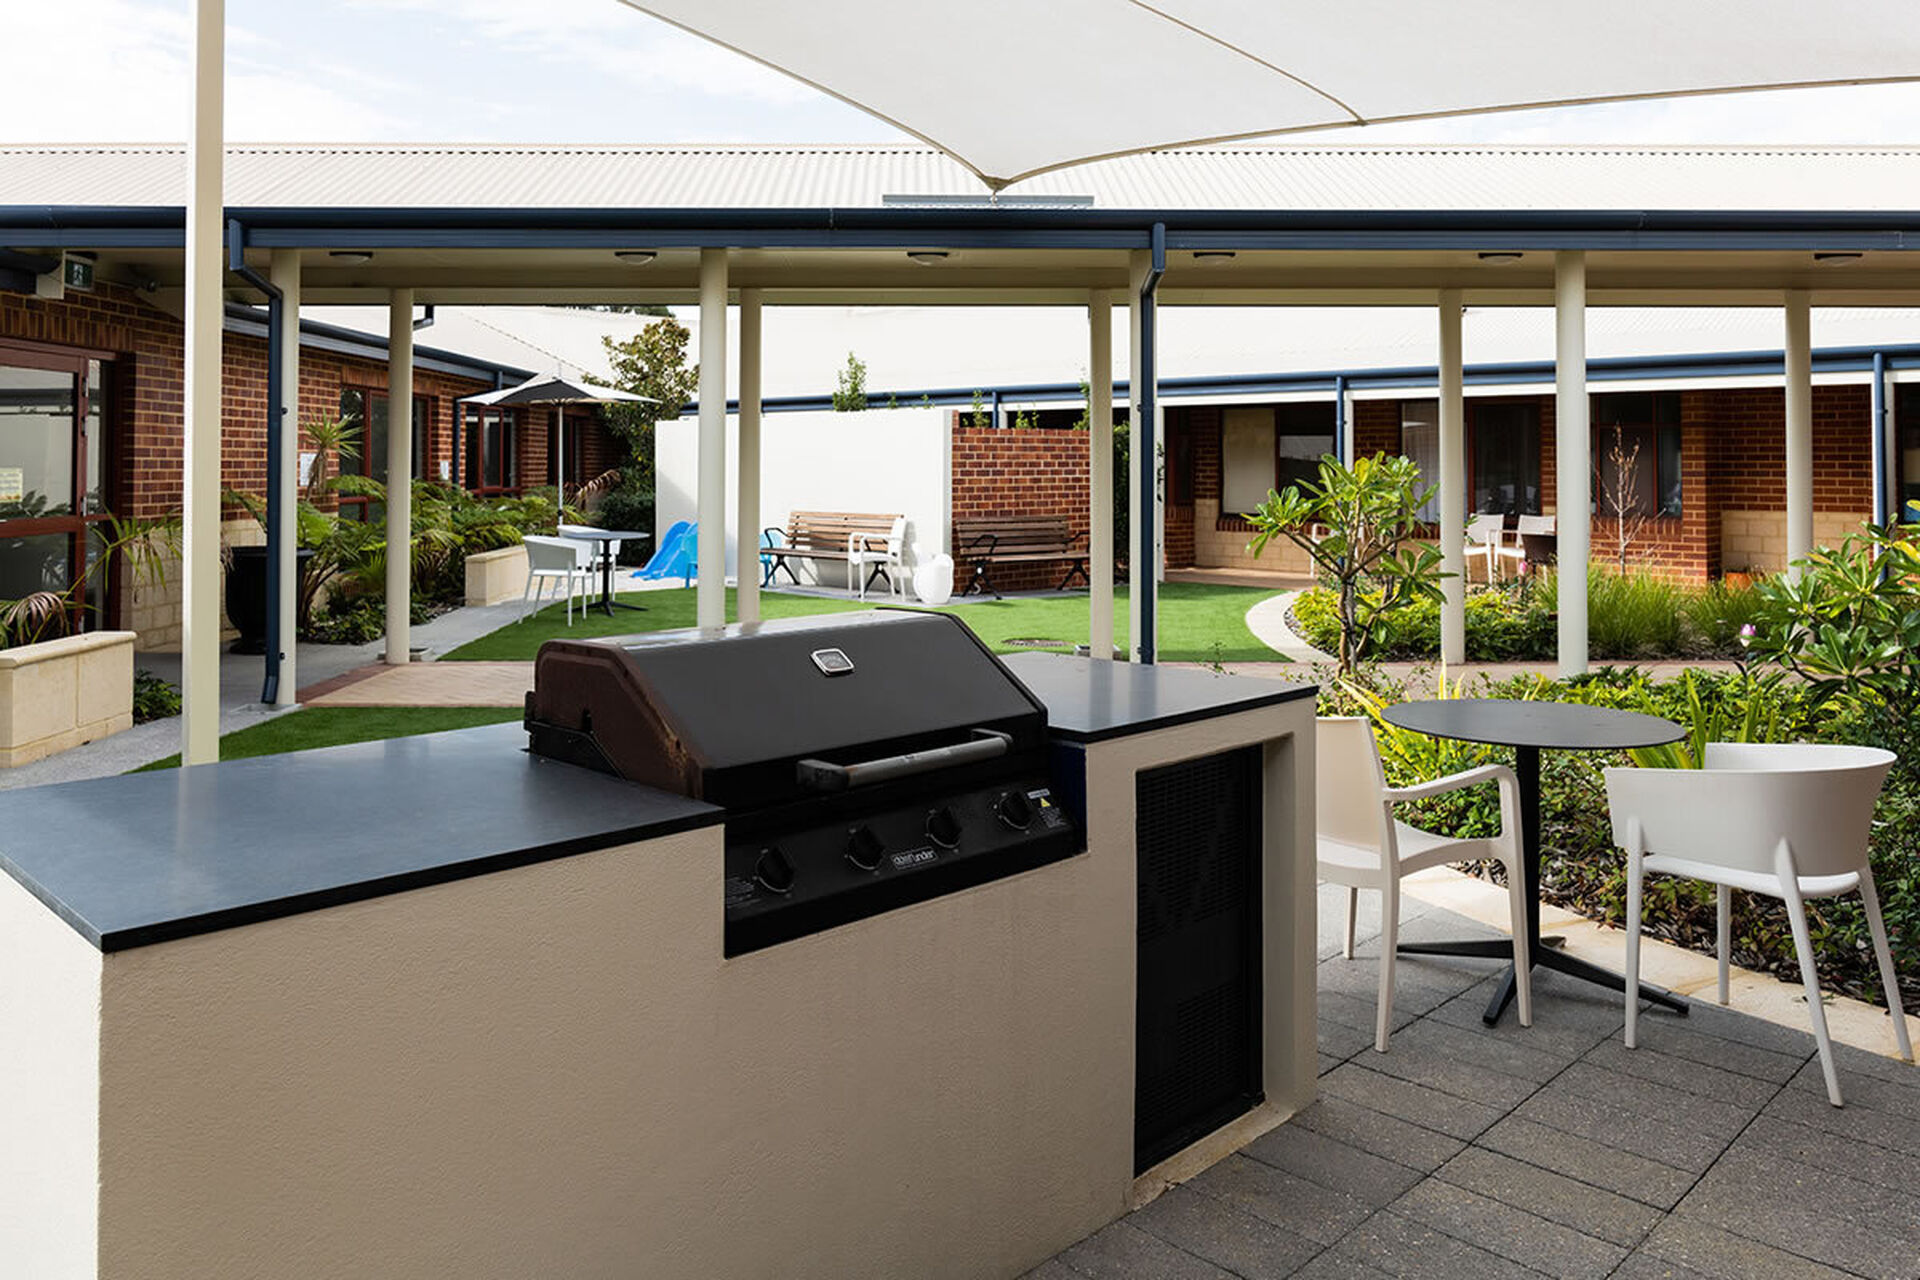 barbeque area at baptistcare david buttfield centre aged care home in gwelup wa for nursing home residents to enjoy